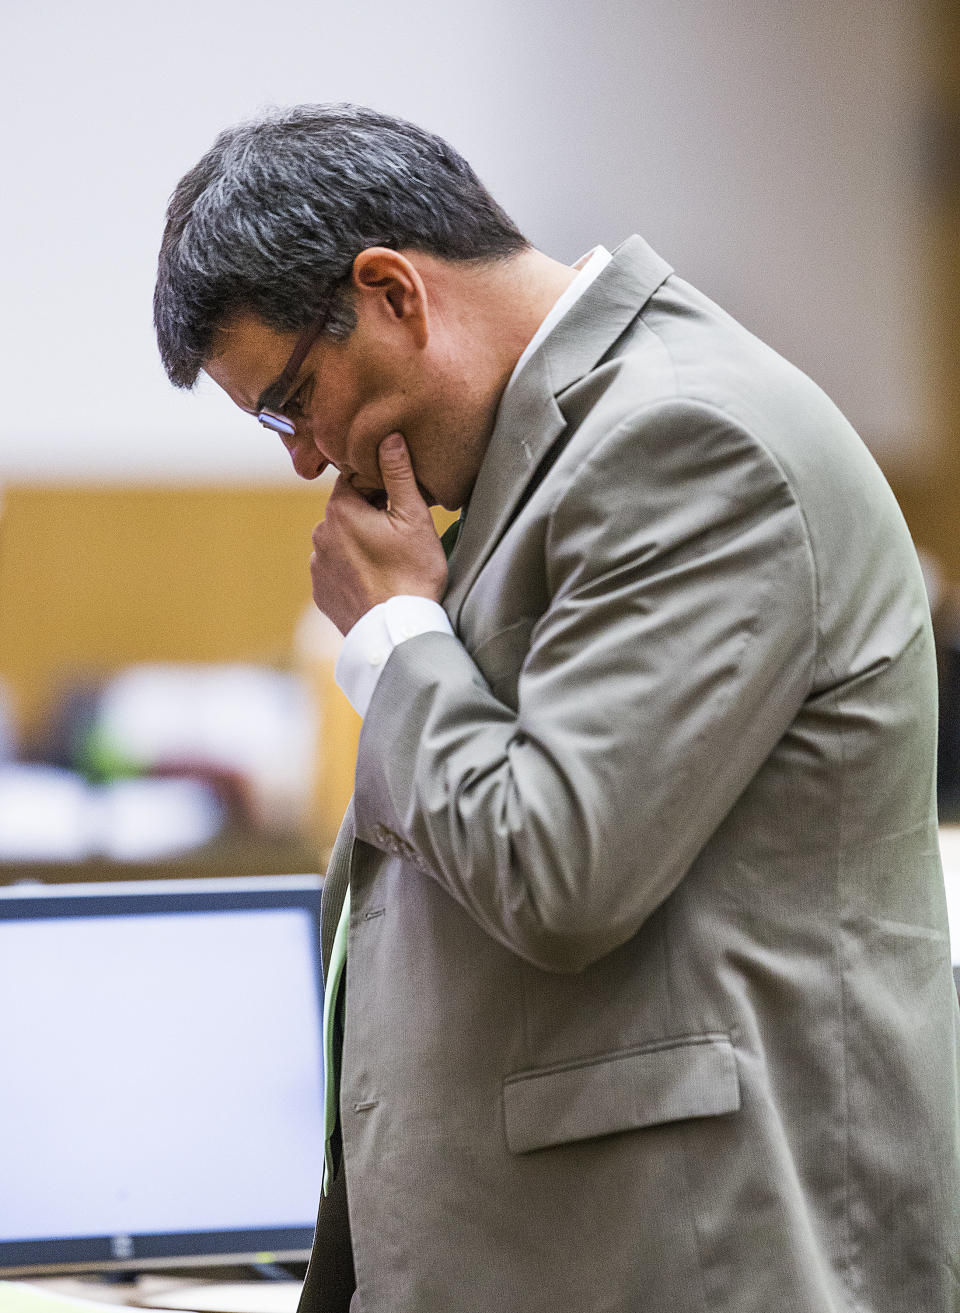 Kurt Nurmi in court during the third day of the penalty retrial on October 23, 2014.